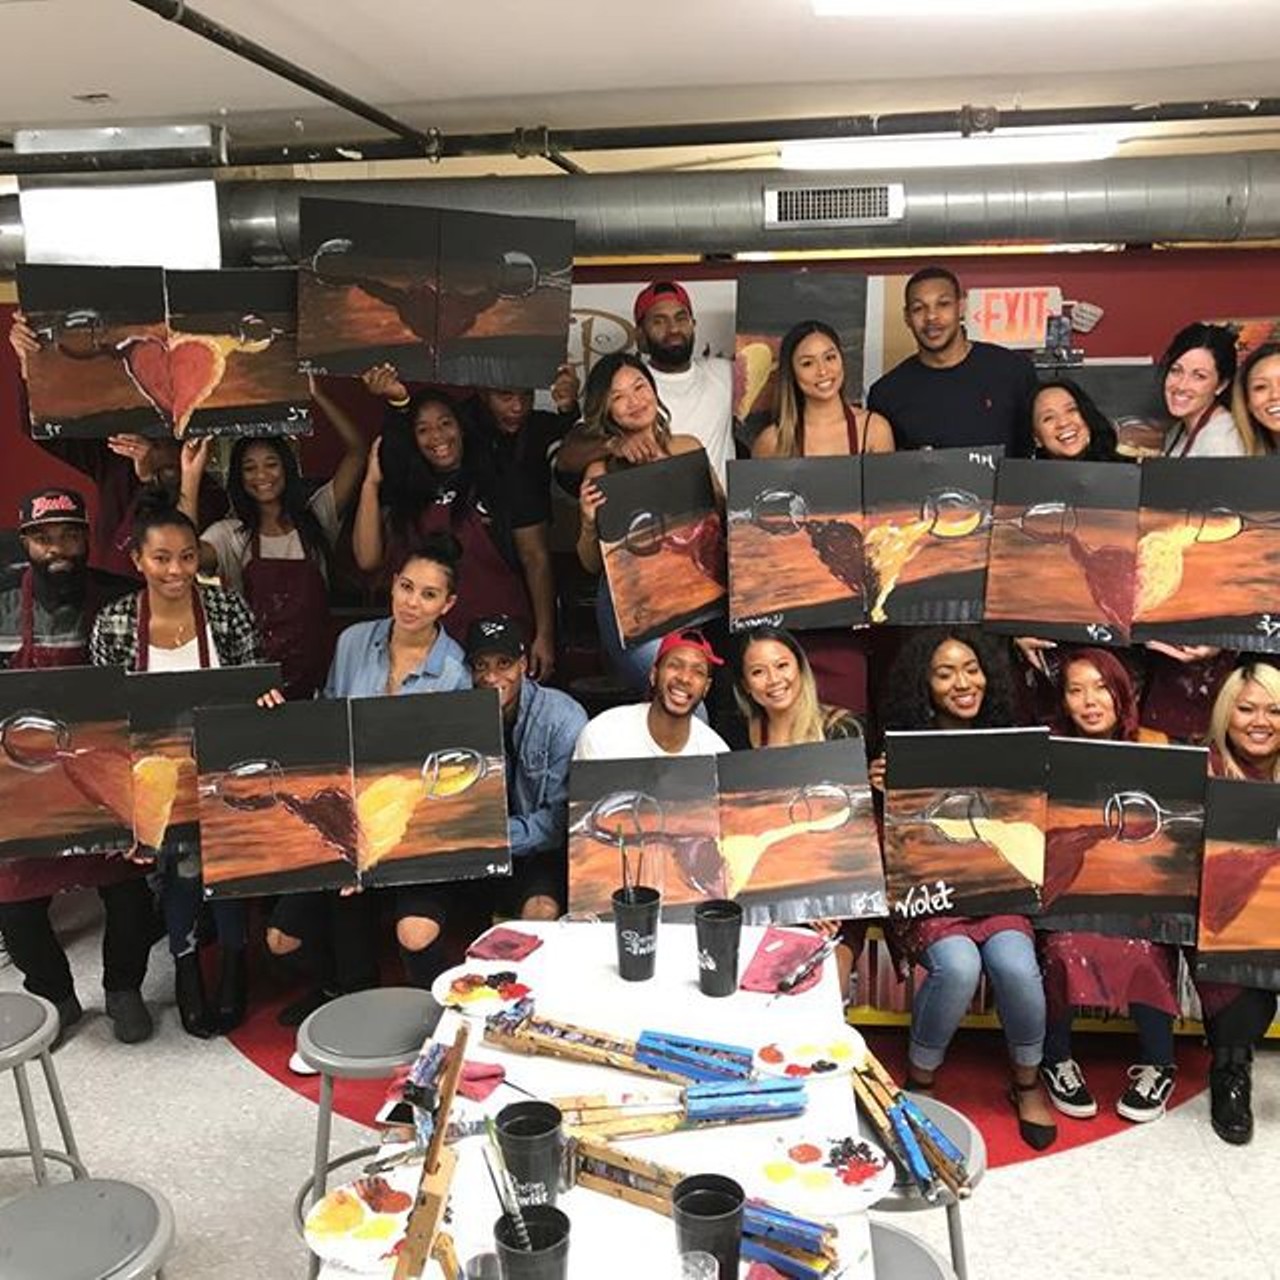 Black History Month Celebration: Crowned
Feb. 24 from 1-3 p.m.; Painting with a Twist; paintingwithatwist.com
Great for a date night or a fun time with friends, Painting with a Twist’s Downtown Detroit location will be hosting this special event, featuring an image that surrounds Black power and pride.